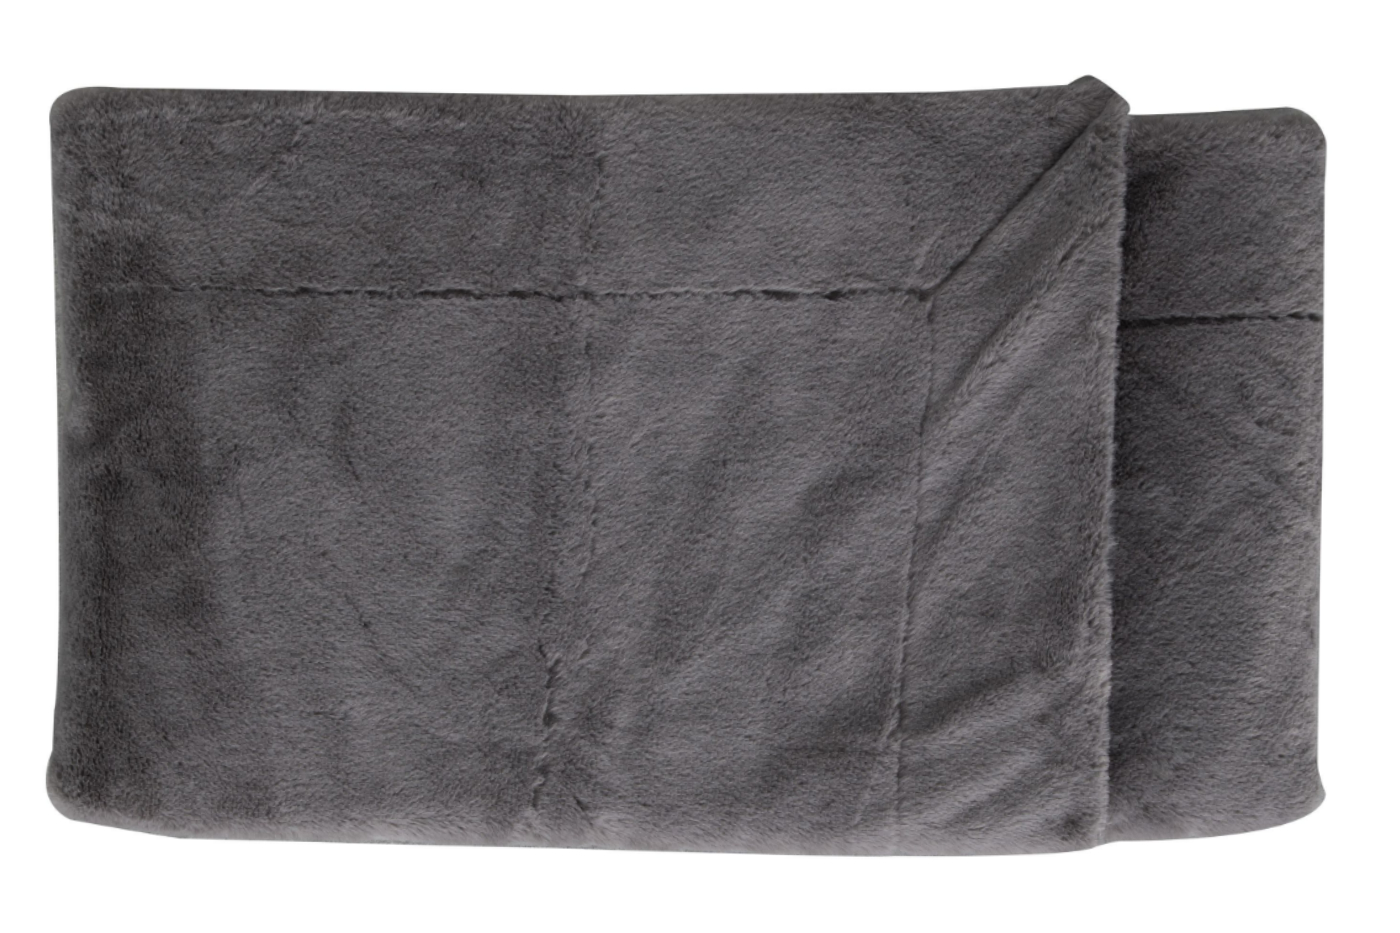 View MidGrey Soft Touch Cosy Rolled Flannel Fleece Throw 1800 x 1400mm Ideal For Beds Or Sofas Stitched Piped Edging Adds Texture And Warmth information